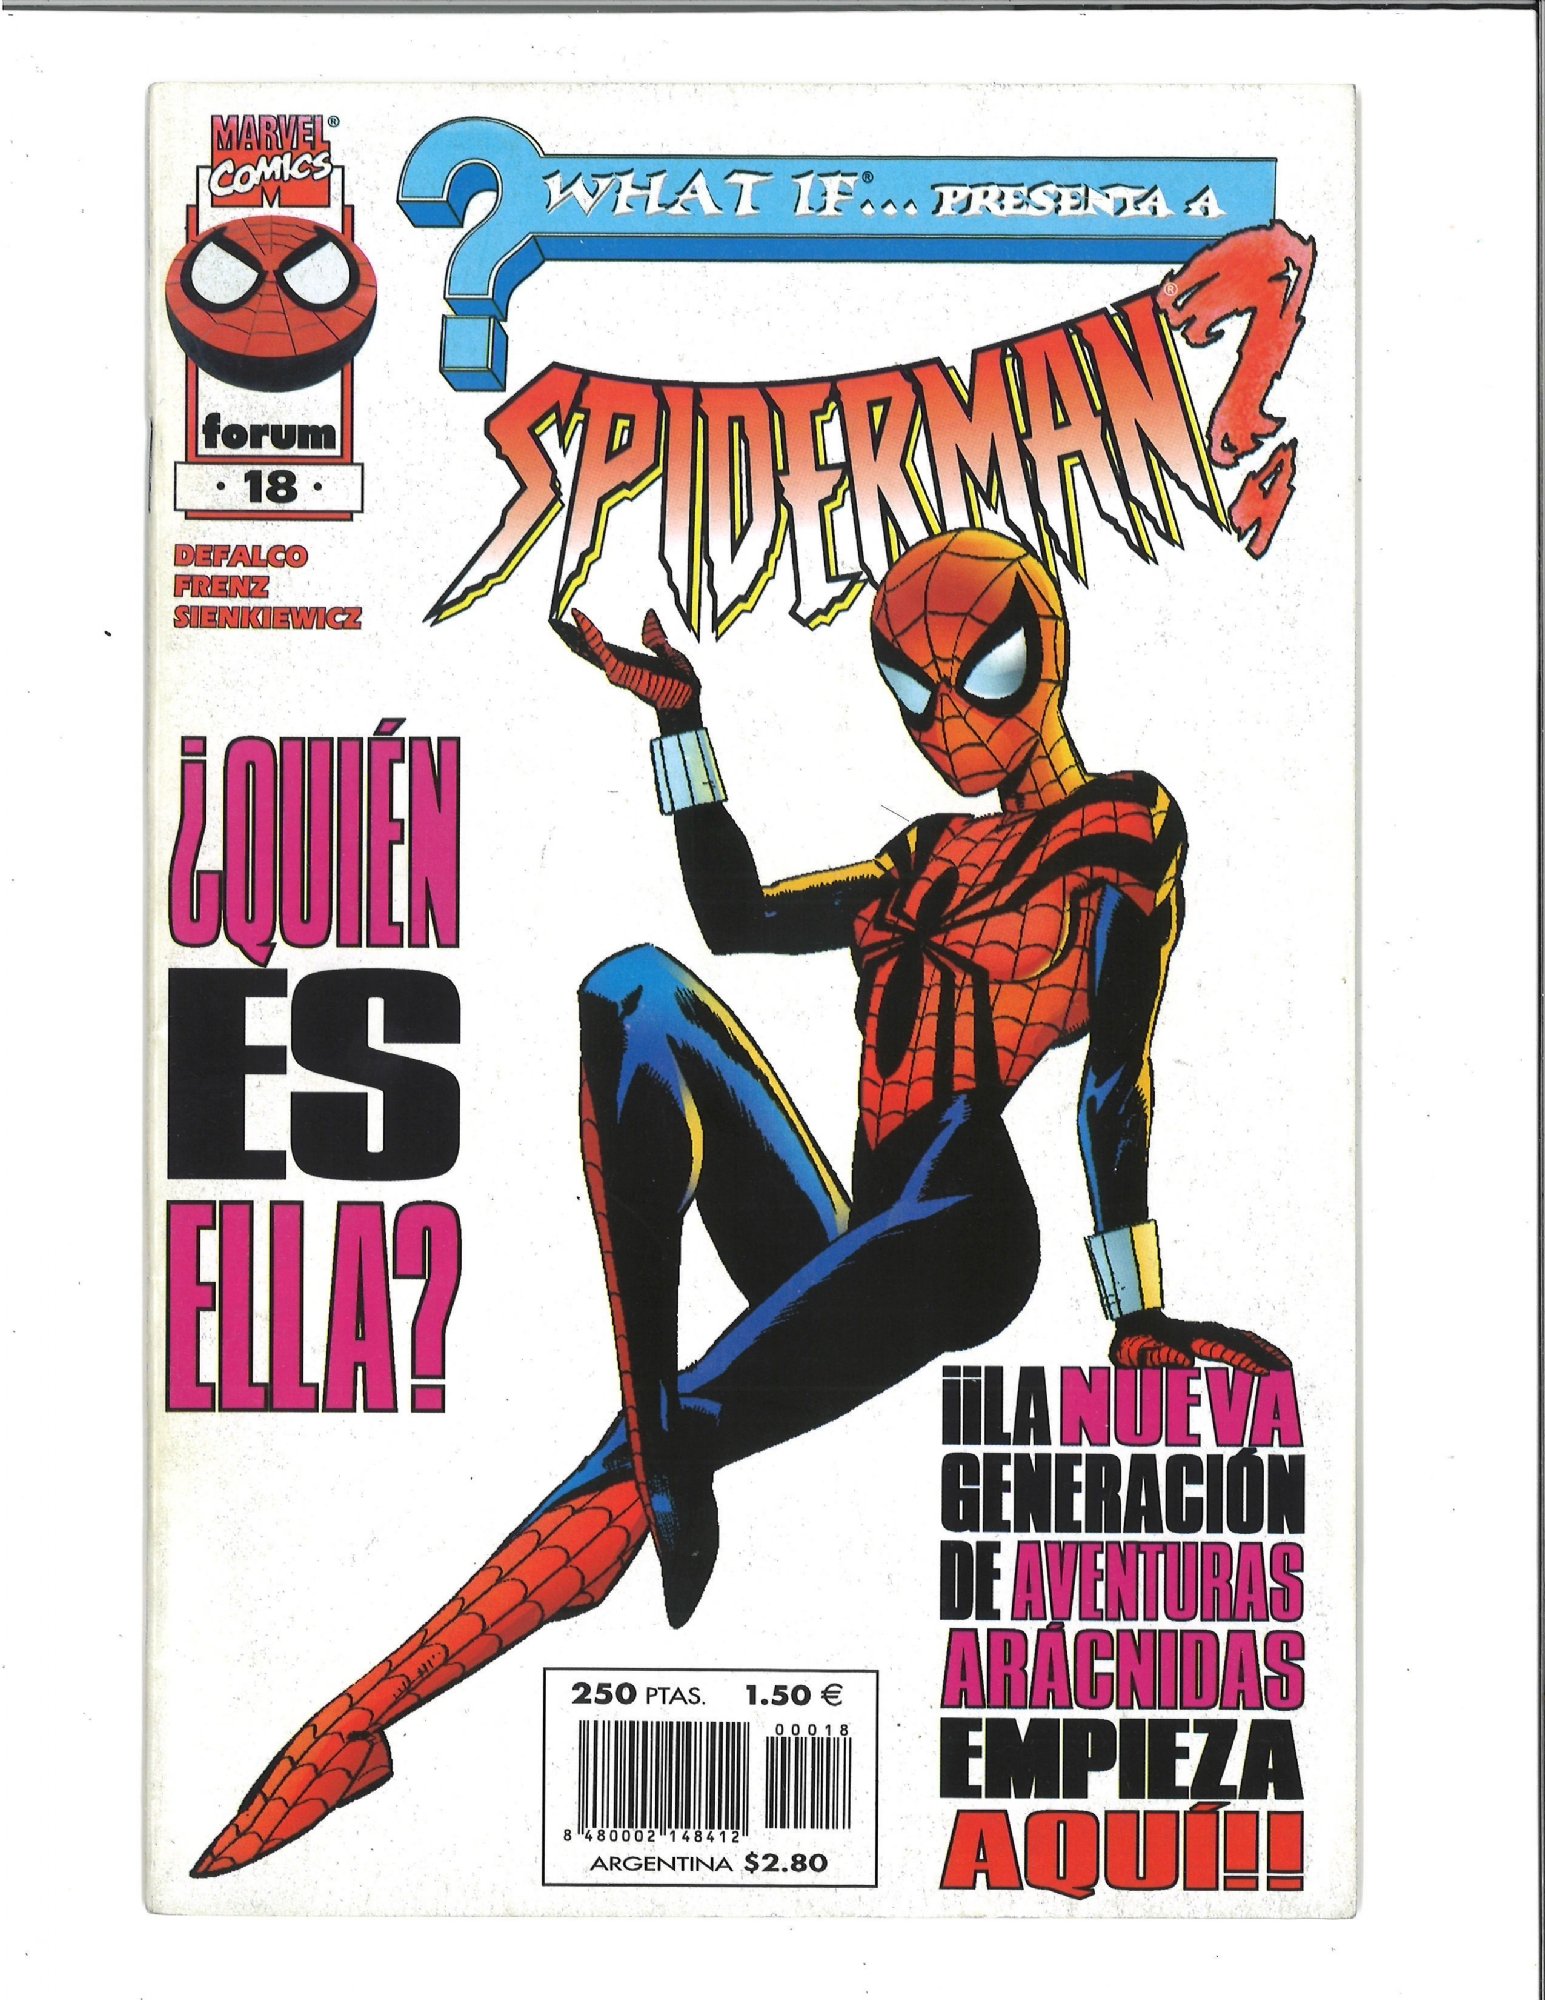 WHAT IF? #105 (Marvel, Feb. 1998) Starring SPIDER-MAN and 